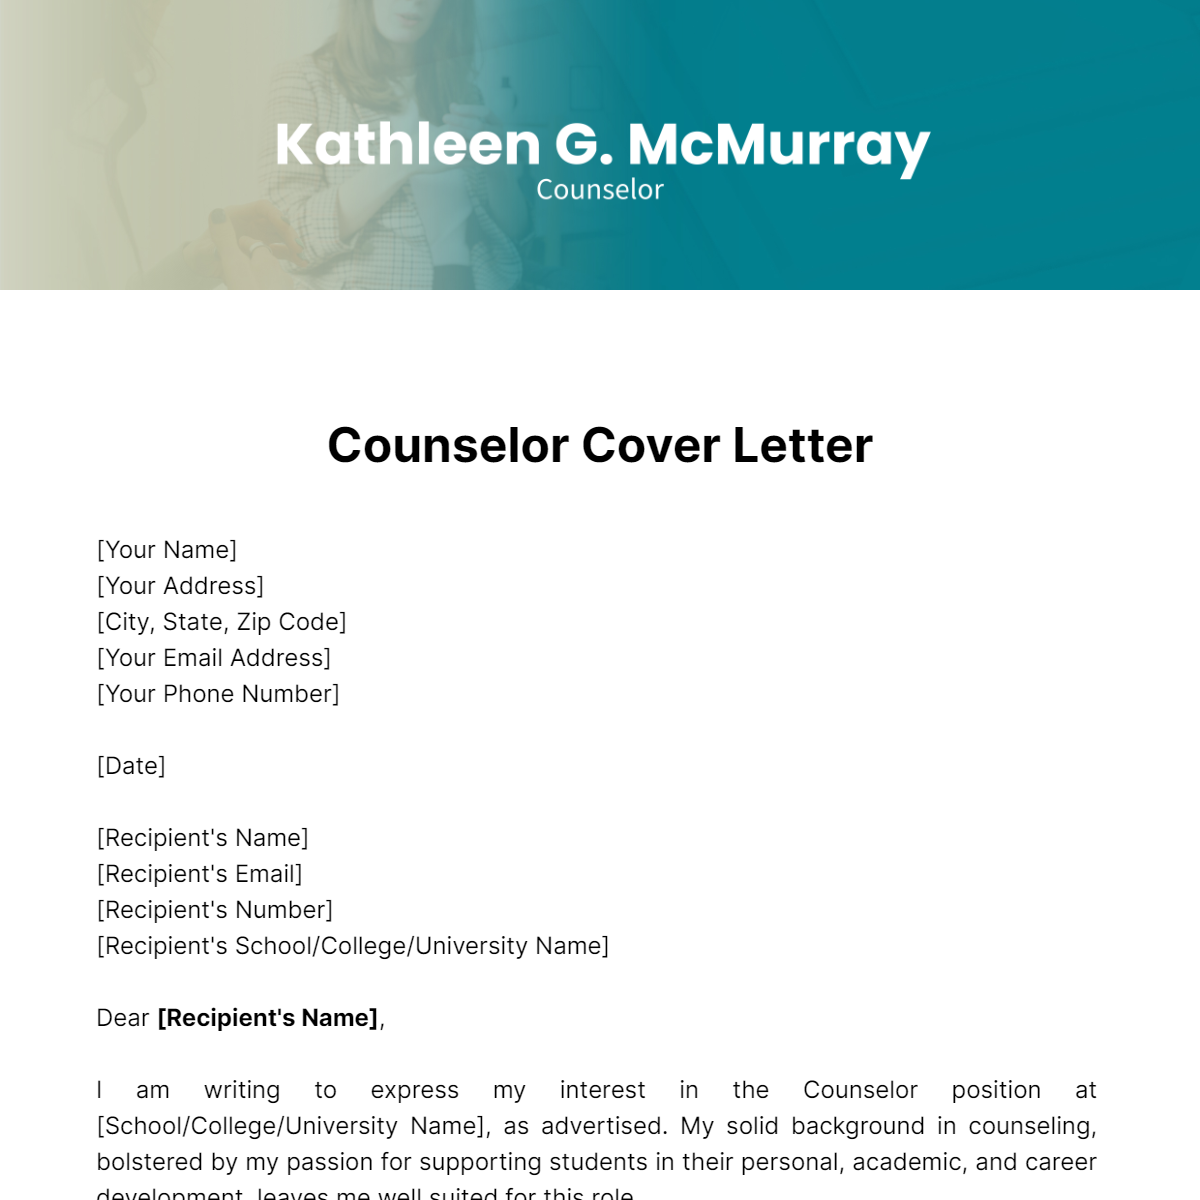 Counselor Cover Letter Template